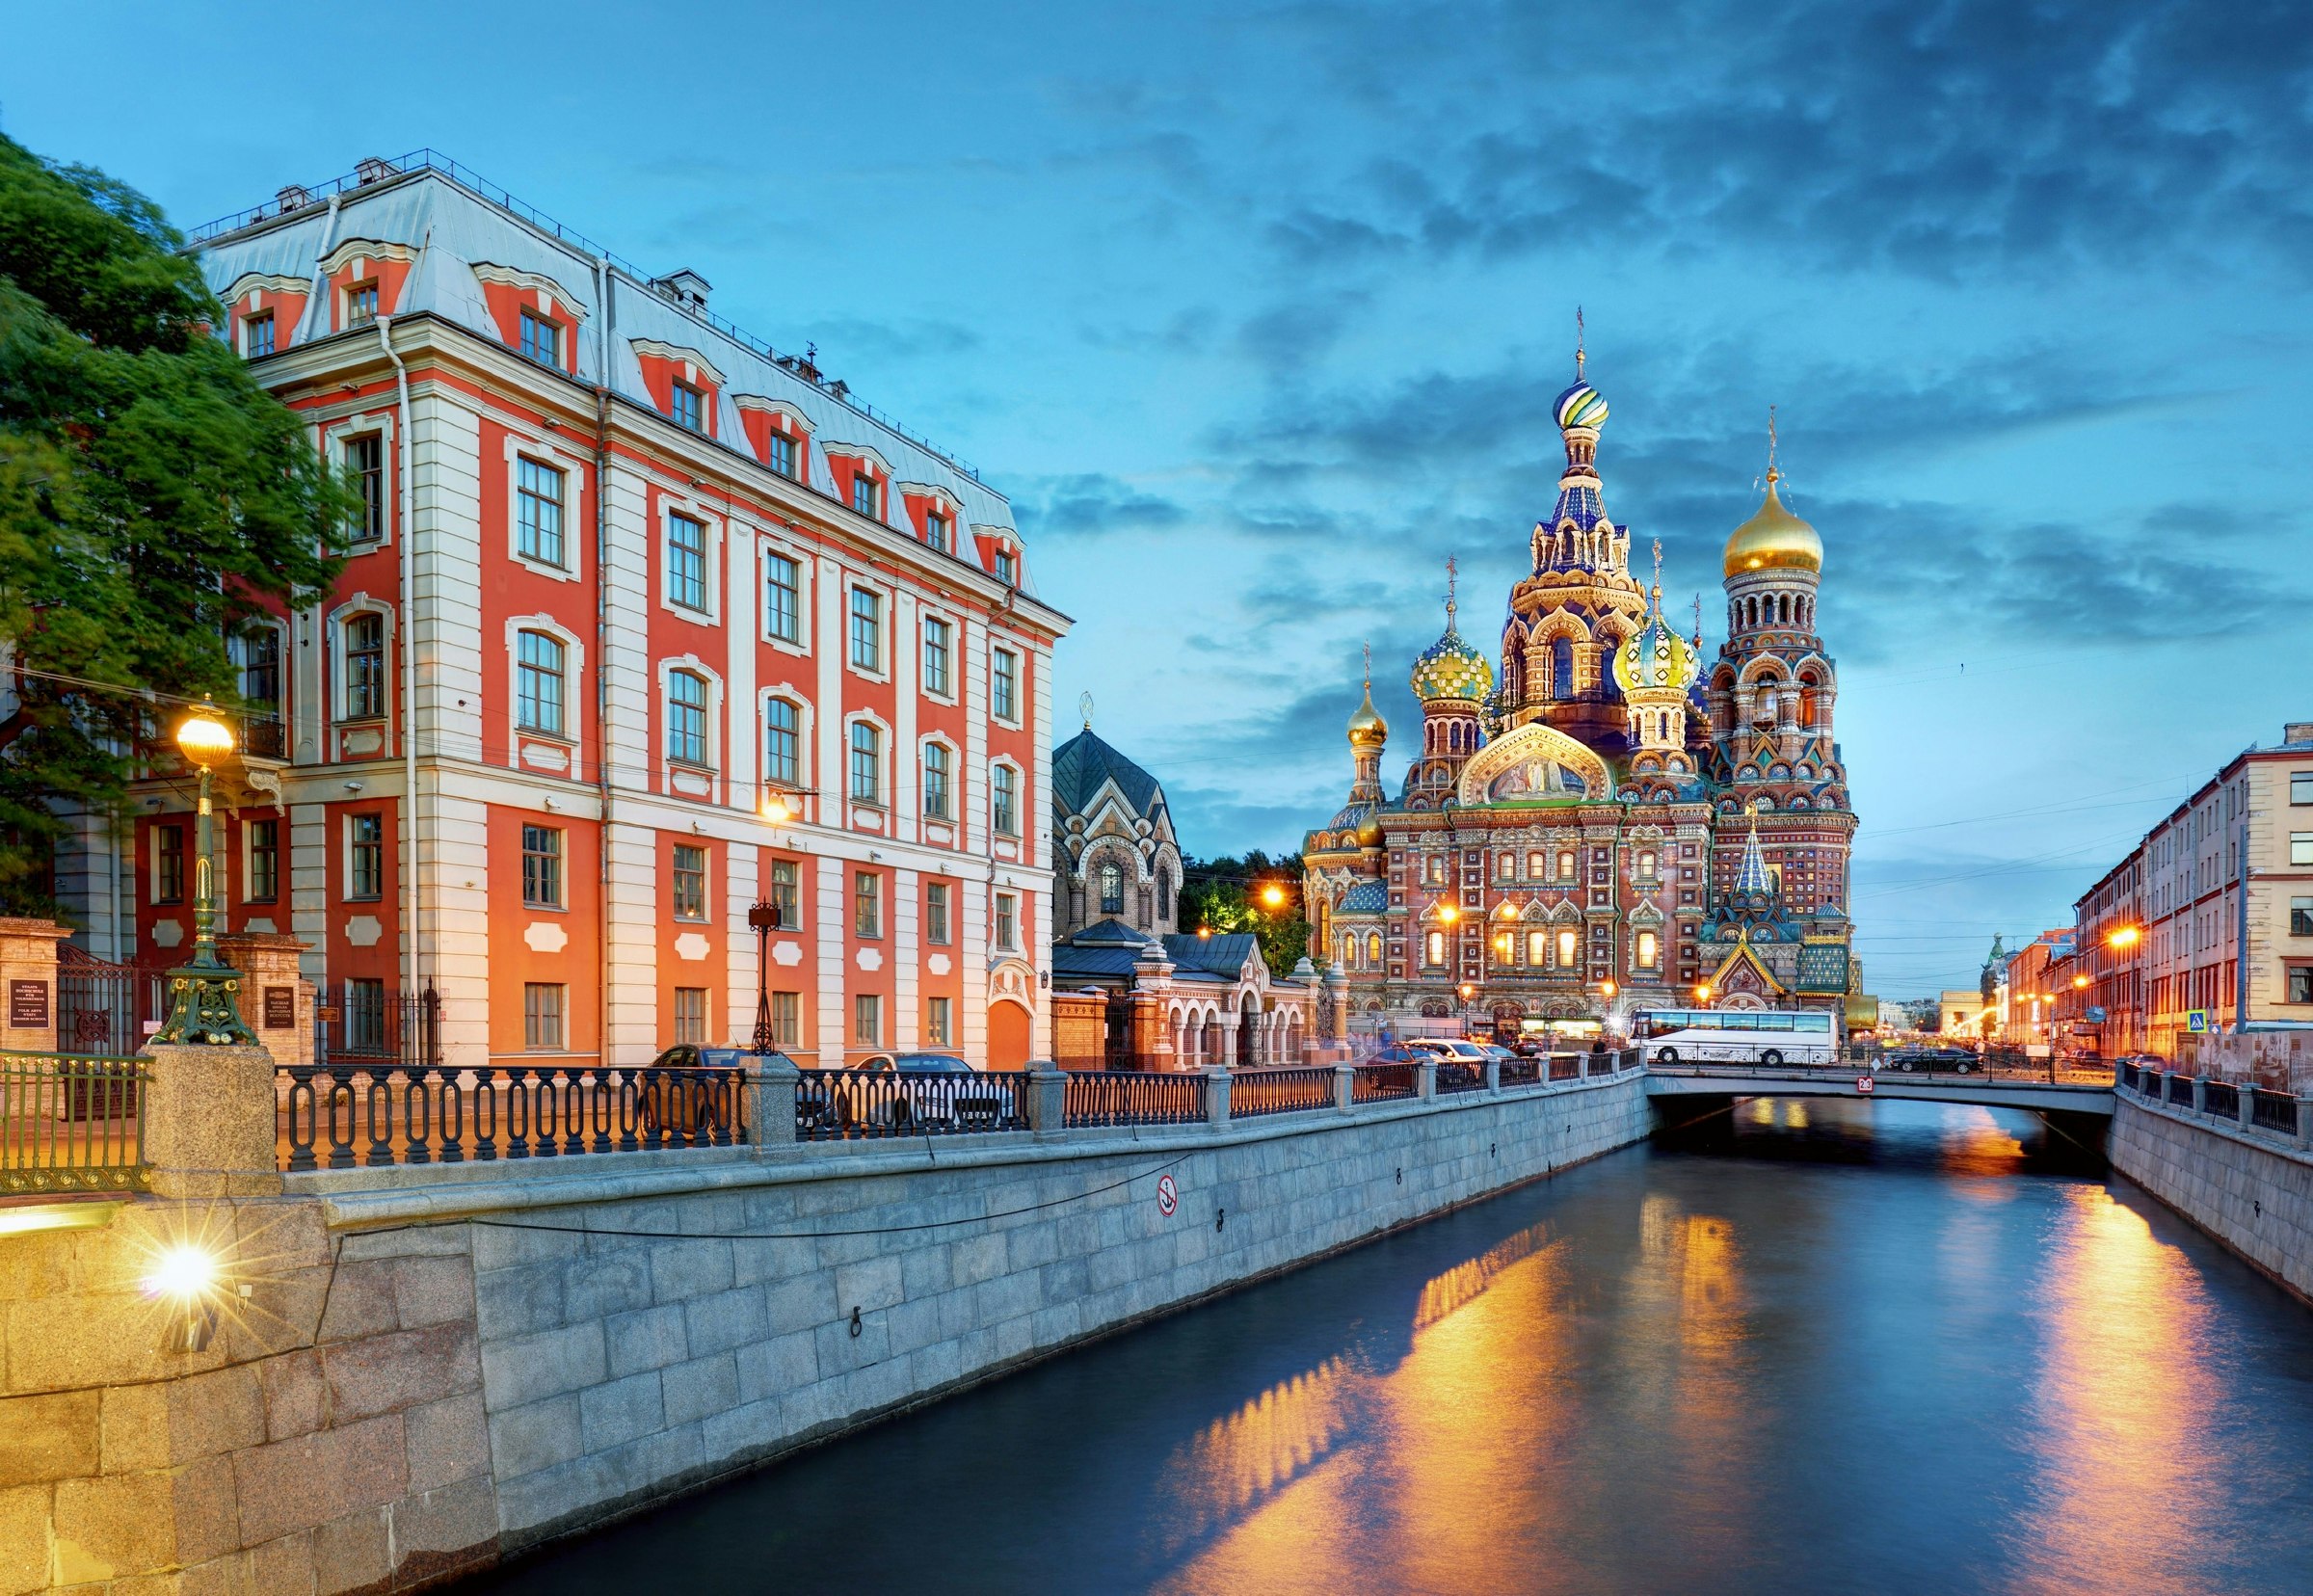 Exterior of the Church of the Saviour on Spilled Blood on the Griboyedov during the evening.jpg